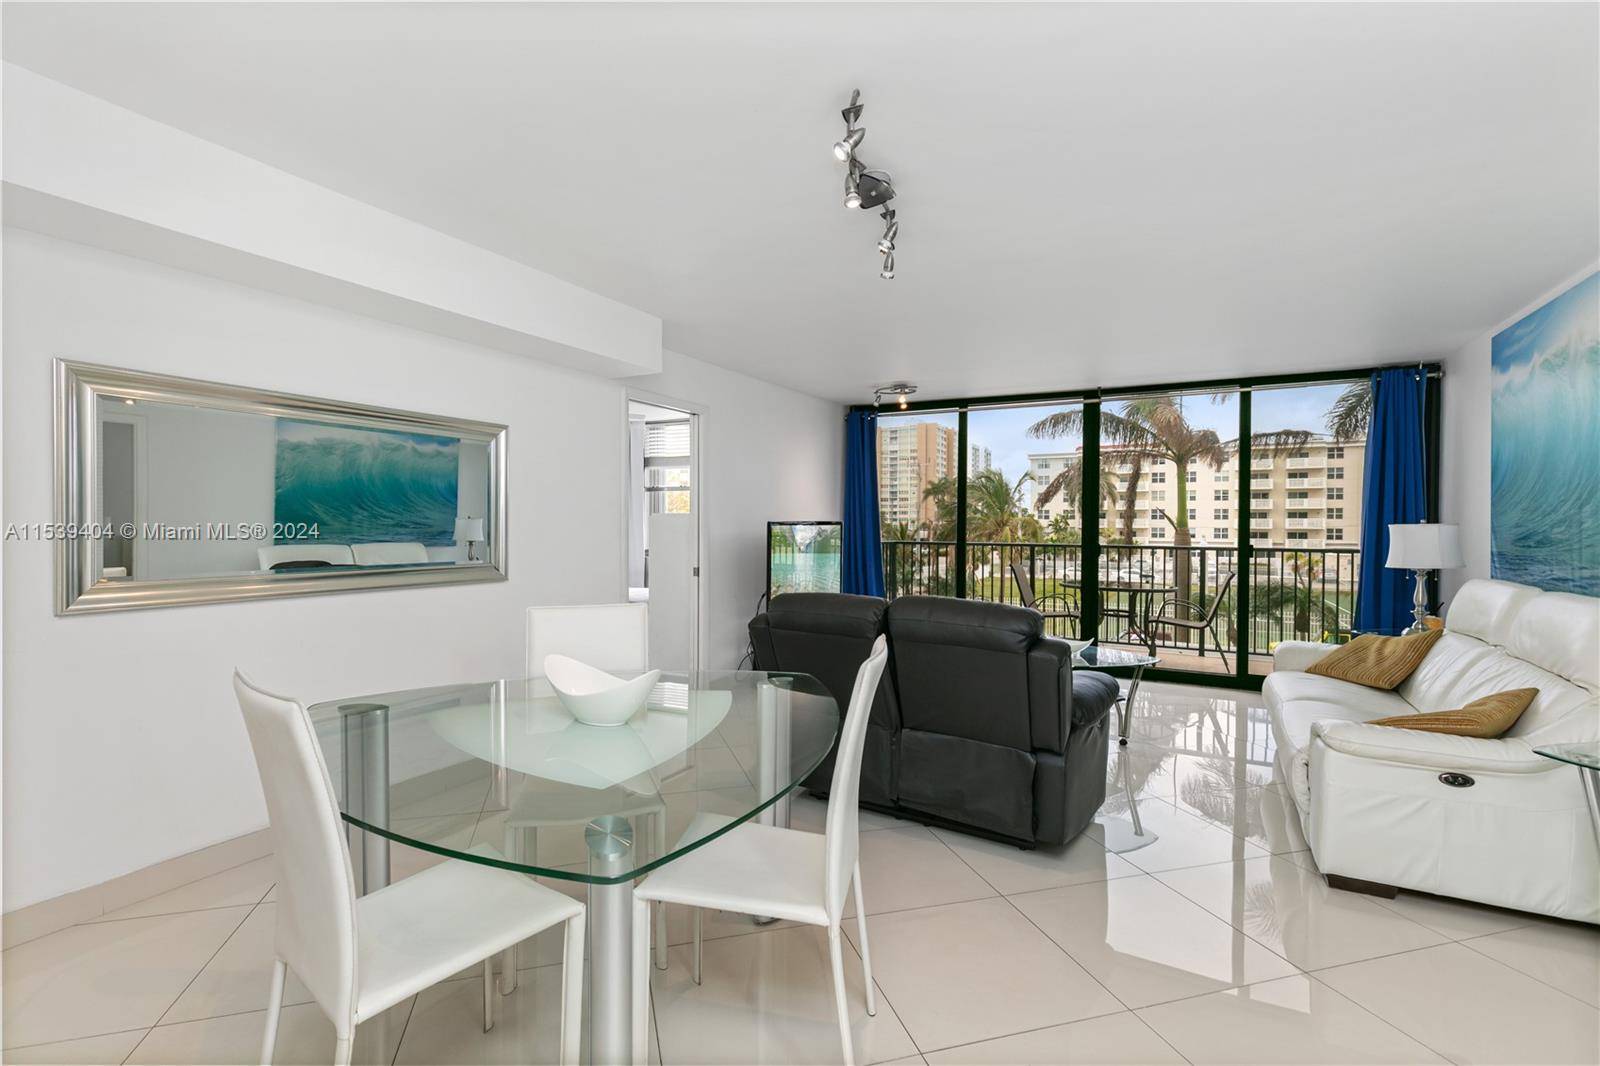 Amazing value for a 2 bedroom on the ocean !